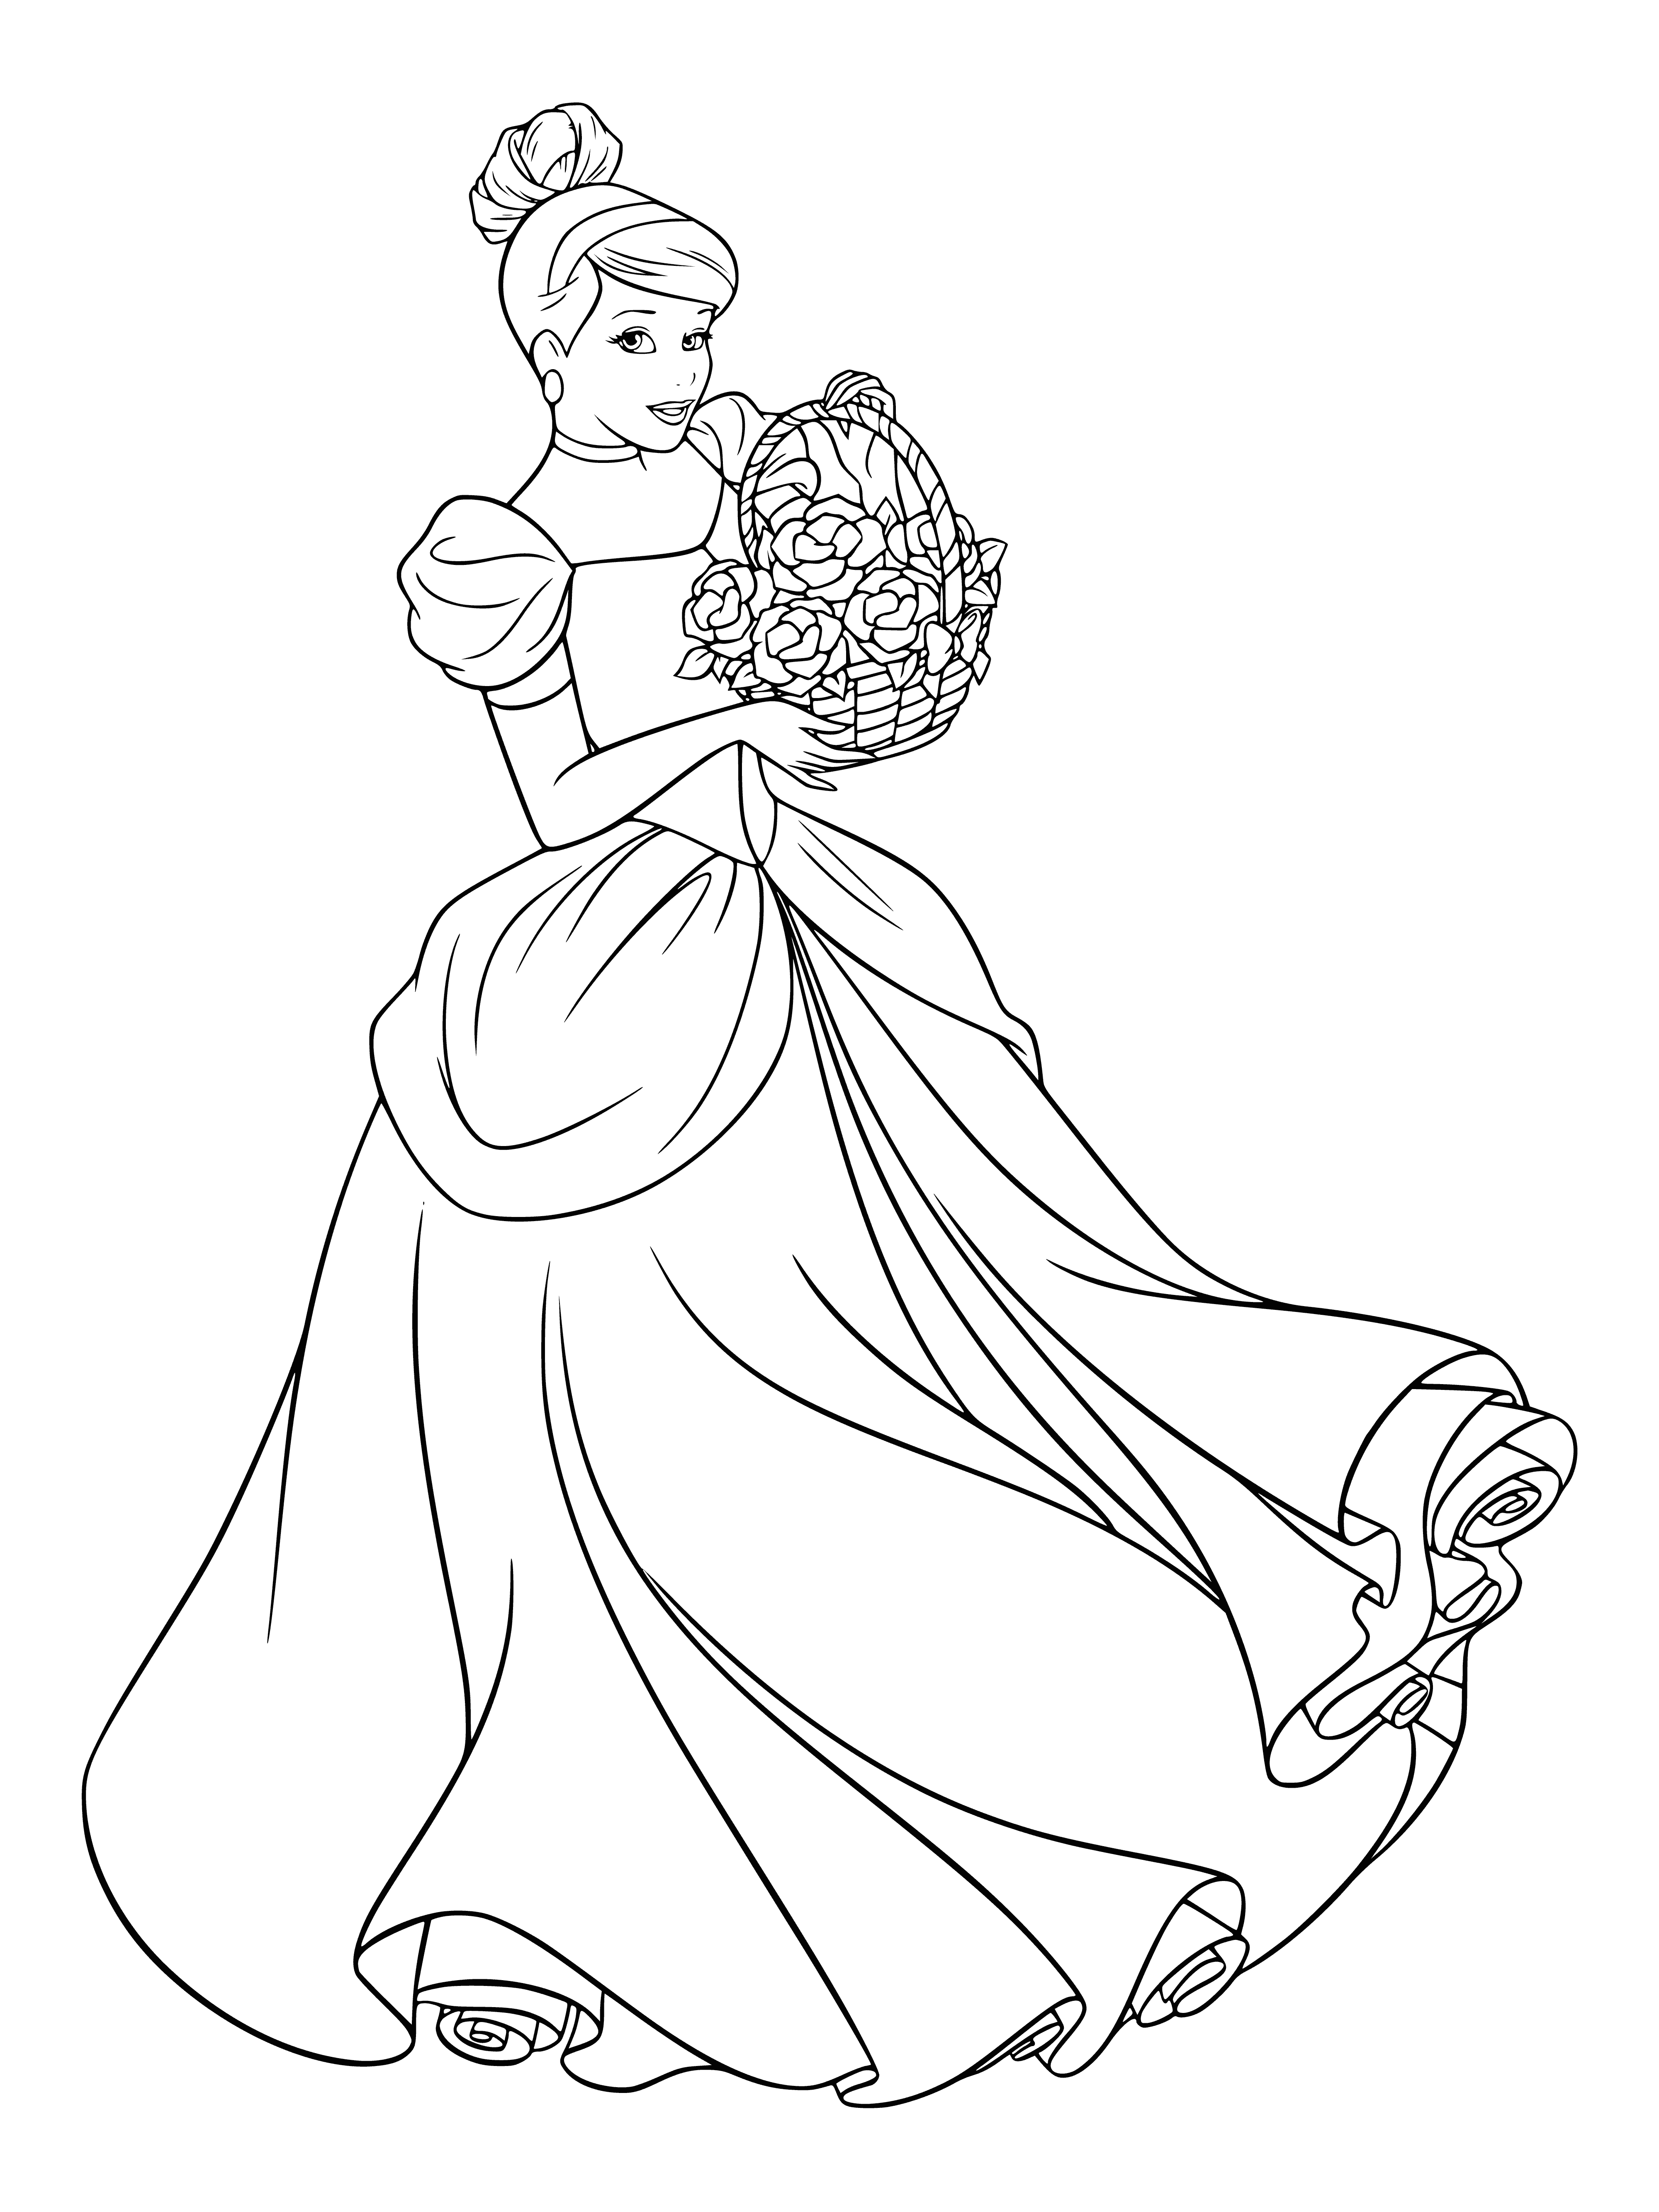 Cinderella with a basket of flowers coloring page